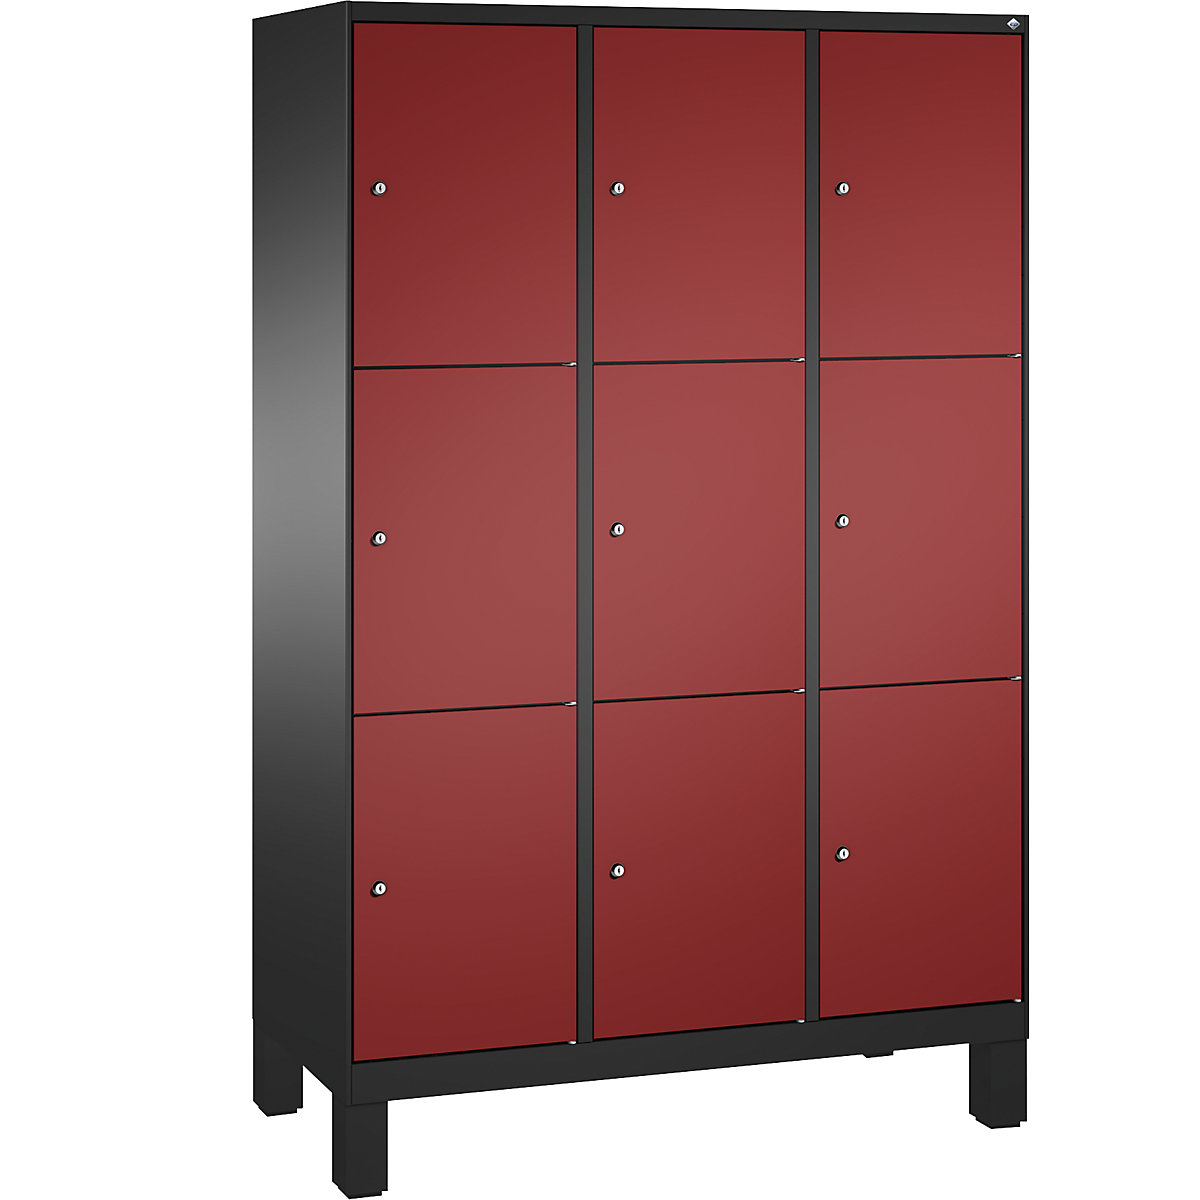 EVOLO locker unit, with feet – C+P, 3 compartments, 3 shelf compartments each, compartment width 400 mm, black grey / ruby red-2